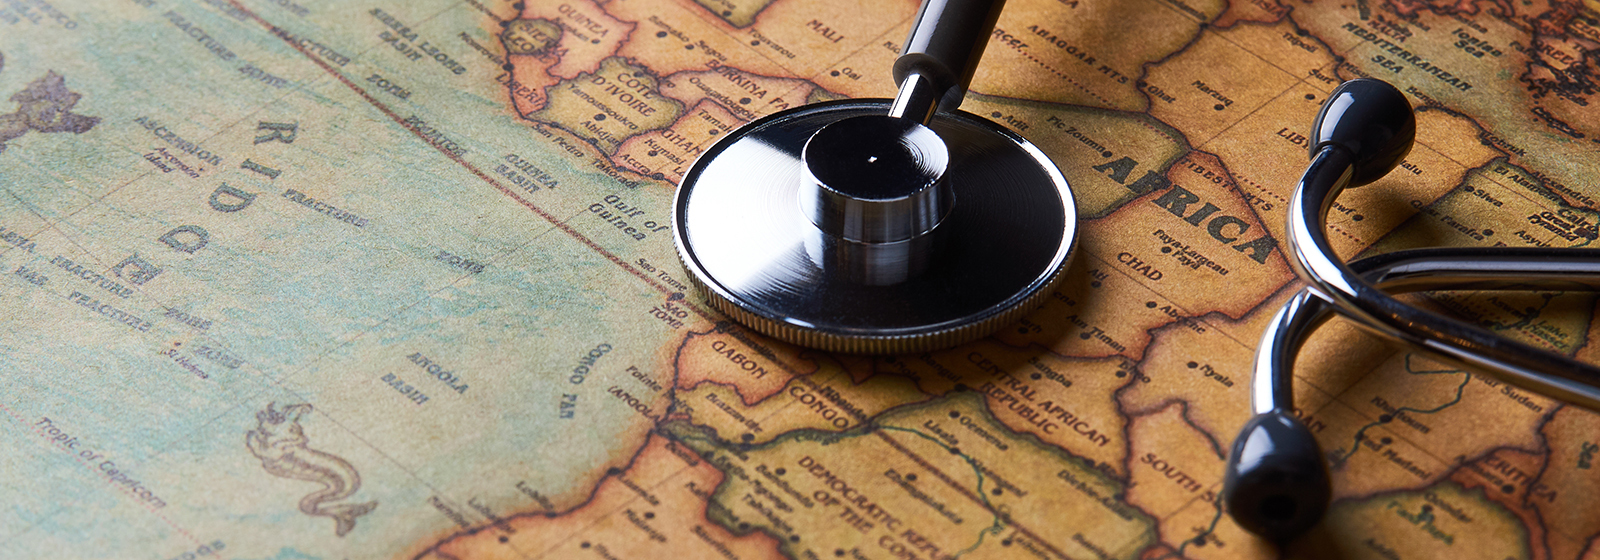 An image of a stethoscope on a map